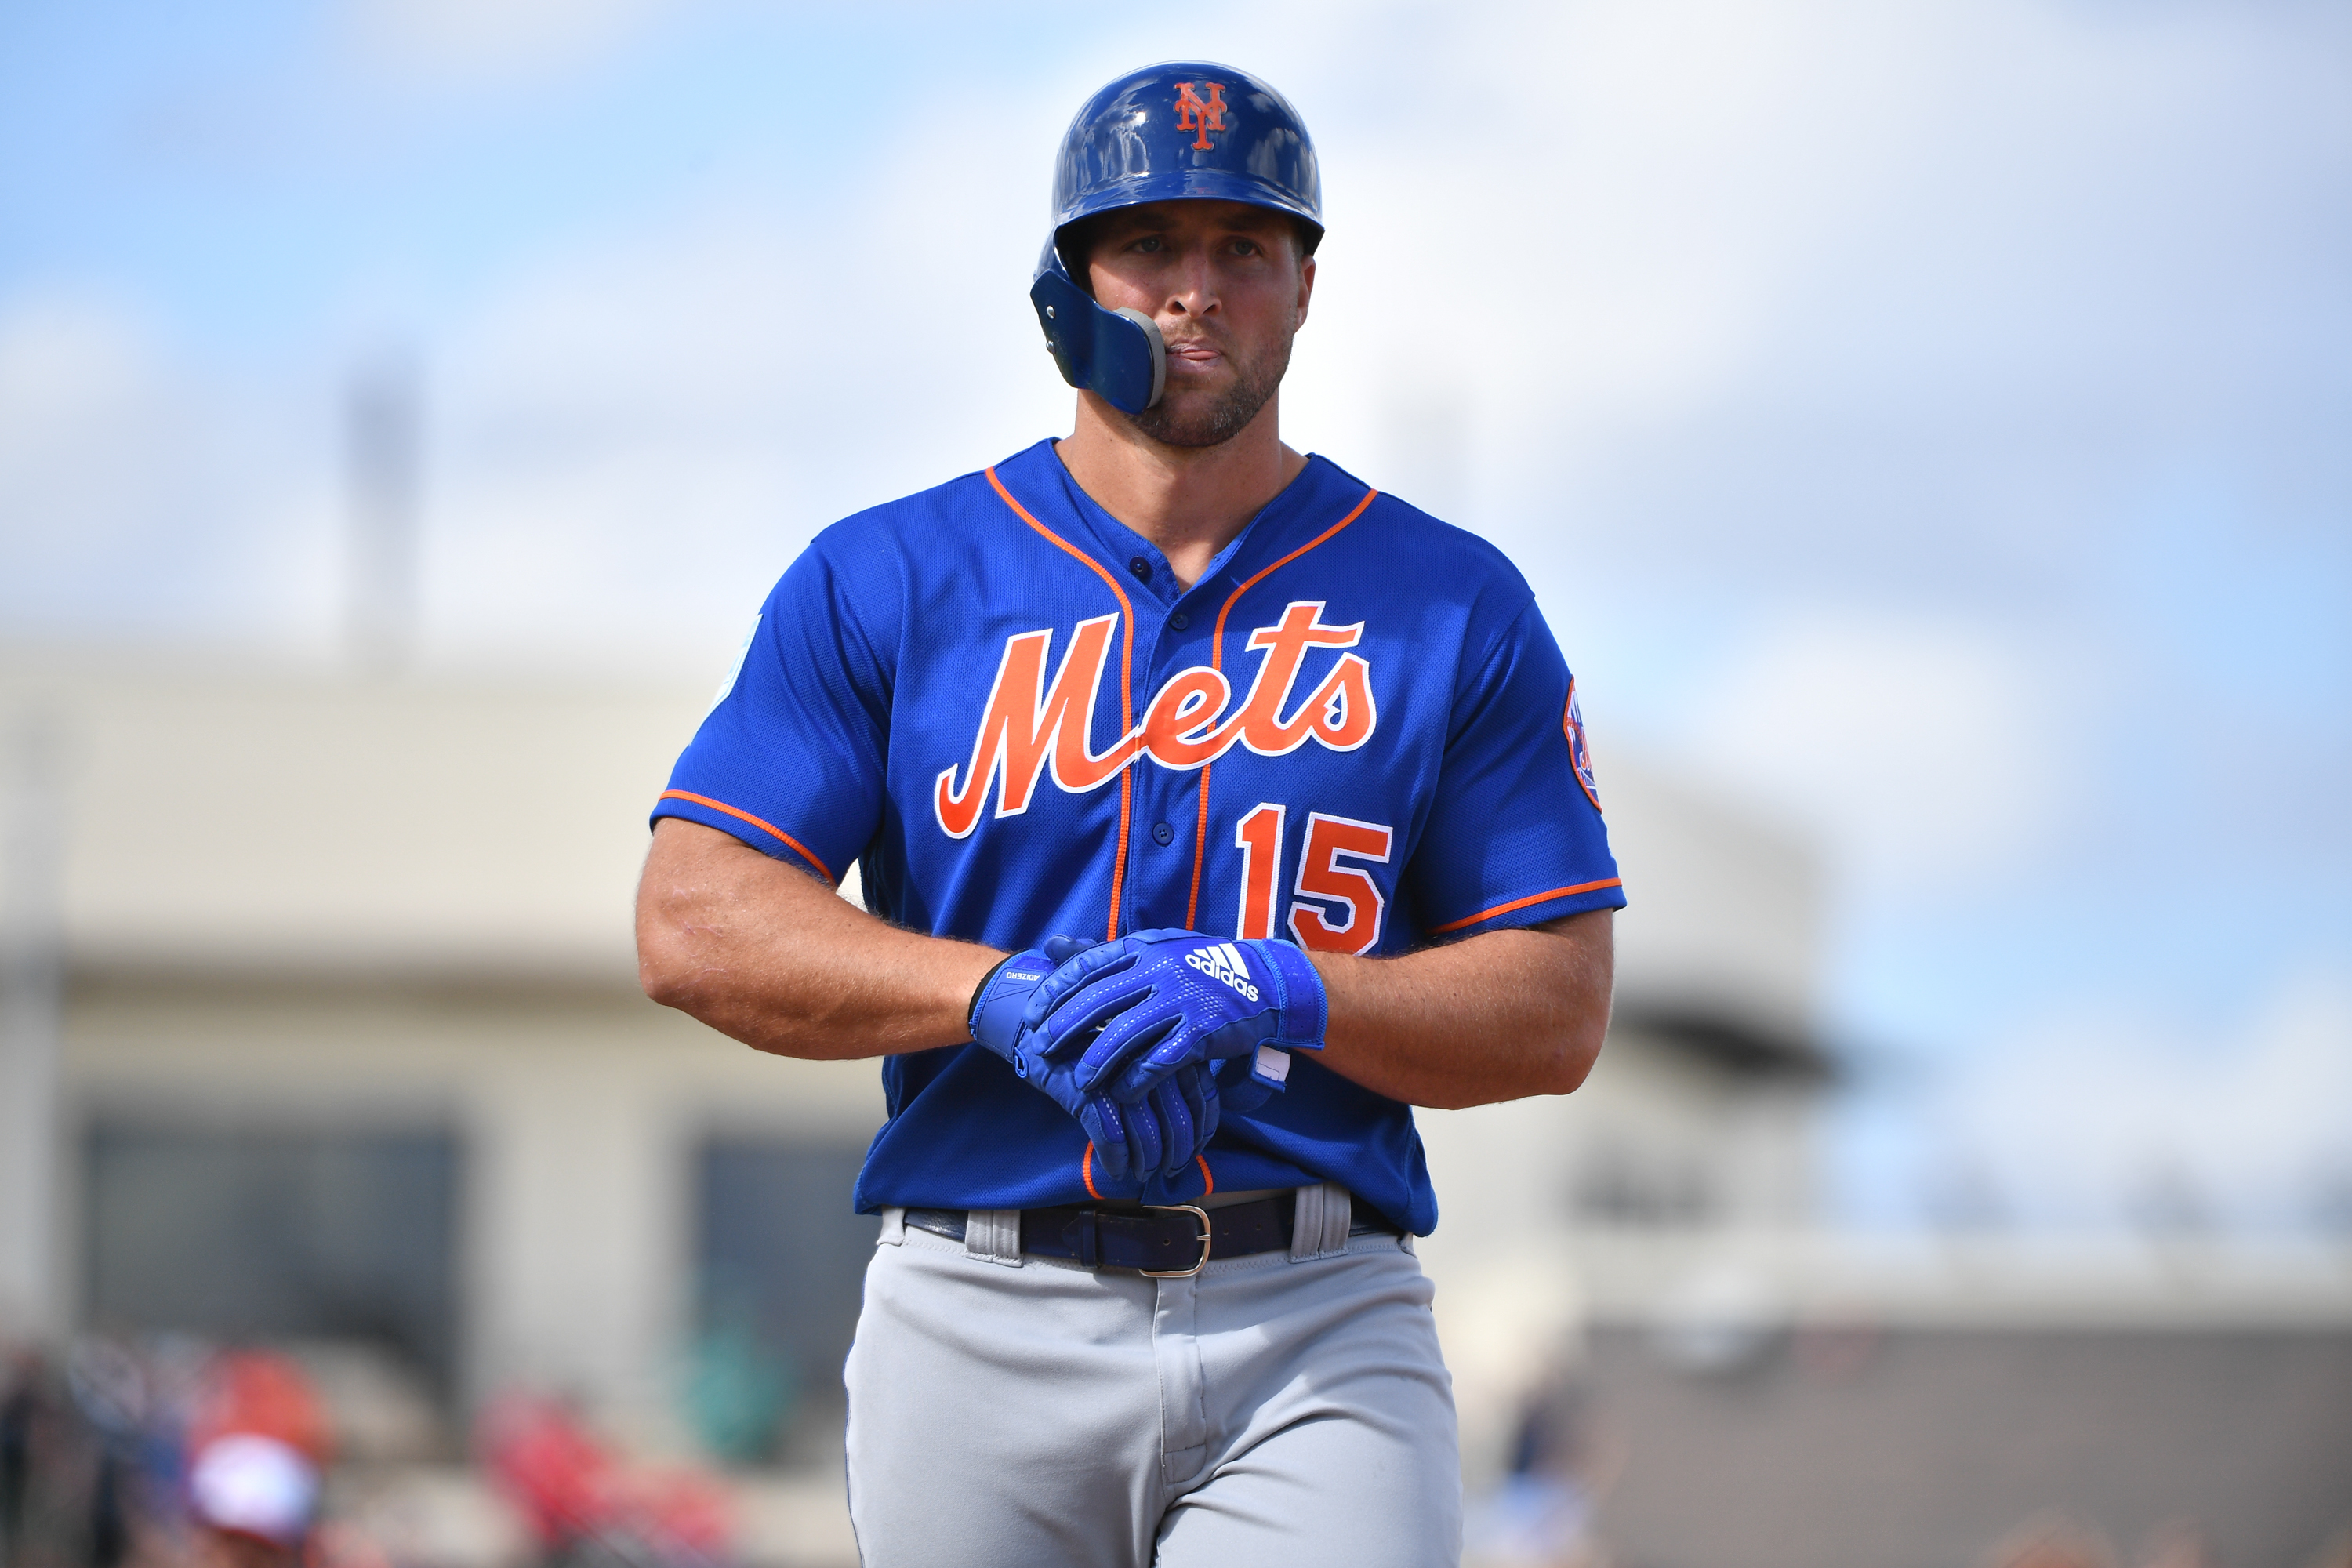 Tim Tebow strikes out twice in New York Mets debut